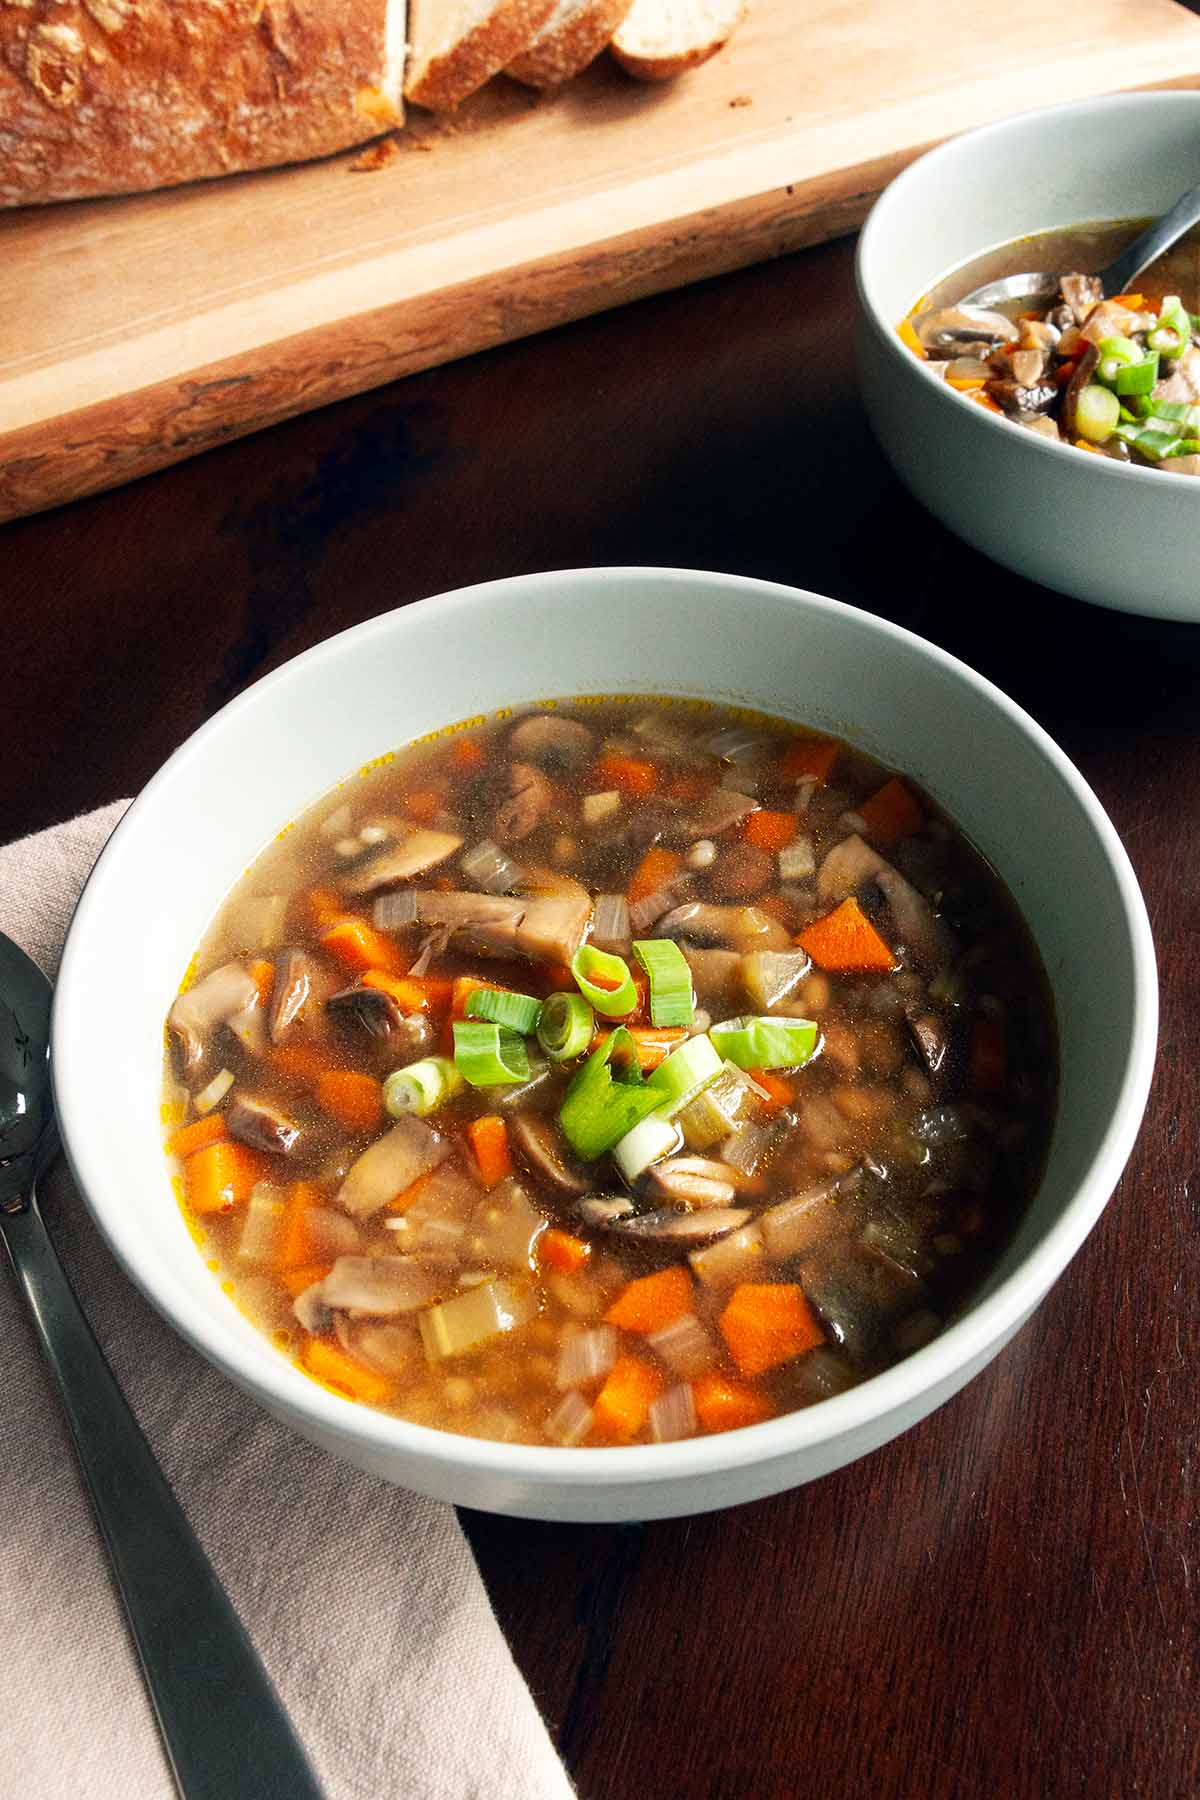 Two bowls of mushroom barley soup topped with sliced scallions on a table.